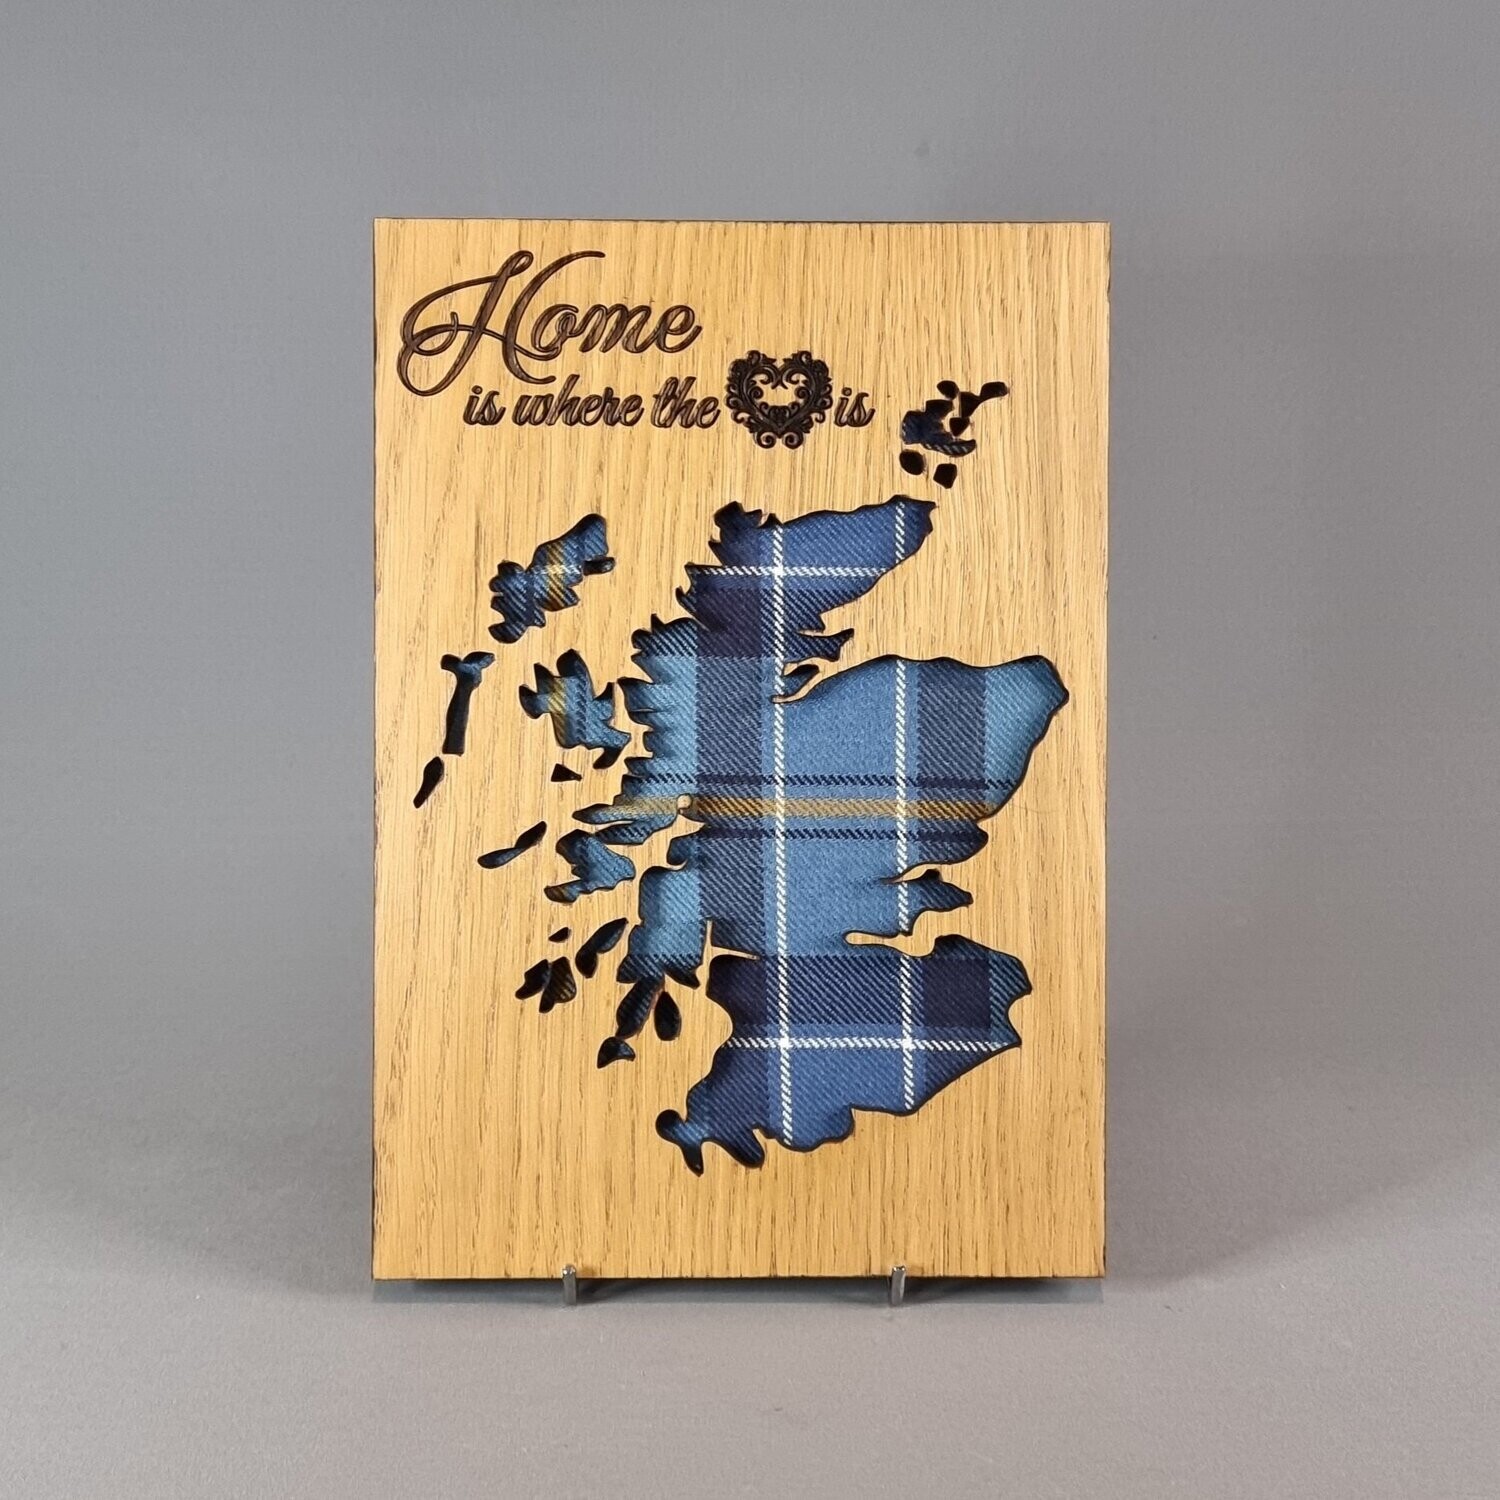 Scotland Map Oak Frame with Tartan
"Home is where the heart is.." Quote.